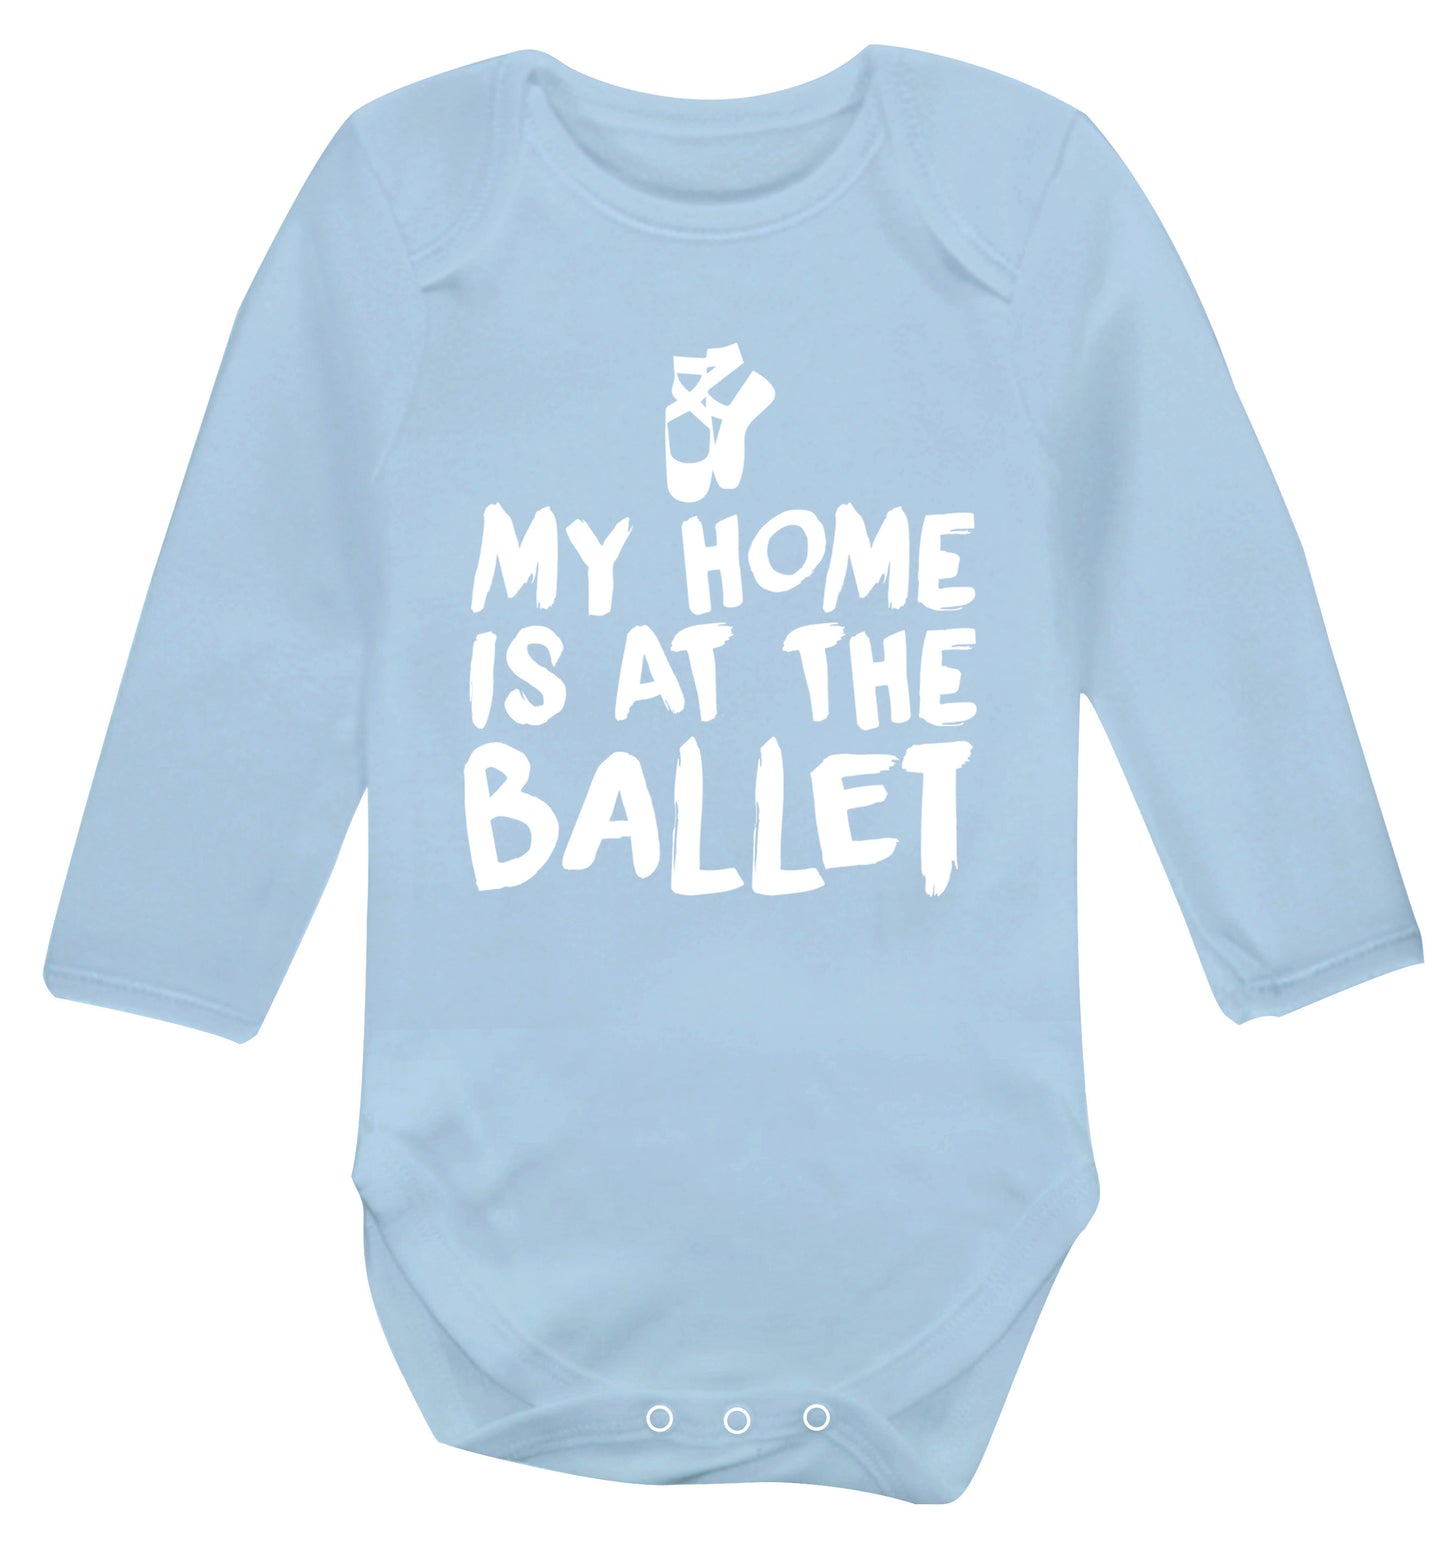 My home is at the dance studio Baby Vest long sleeved pale blue 6-12 months